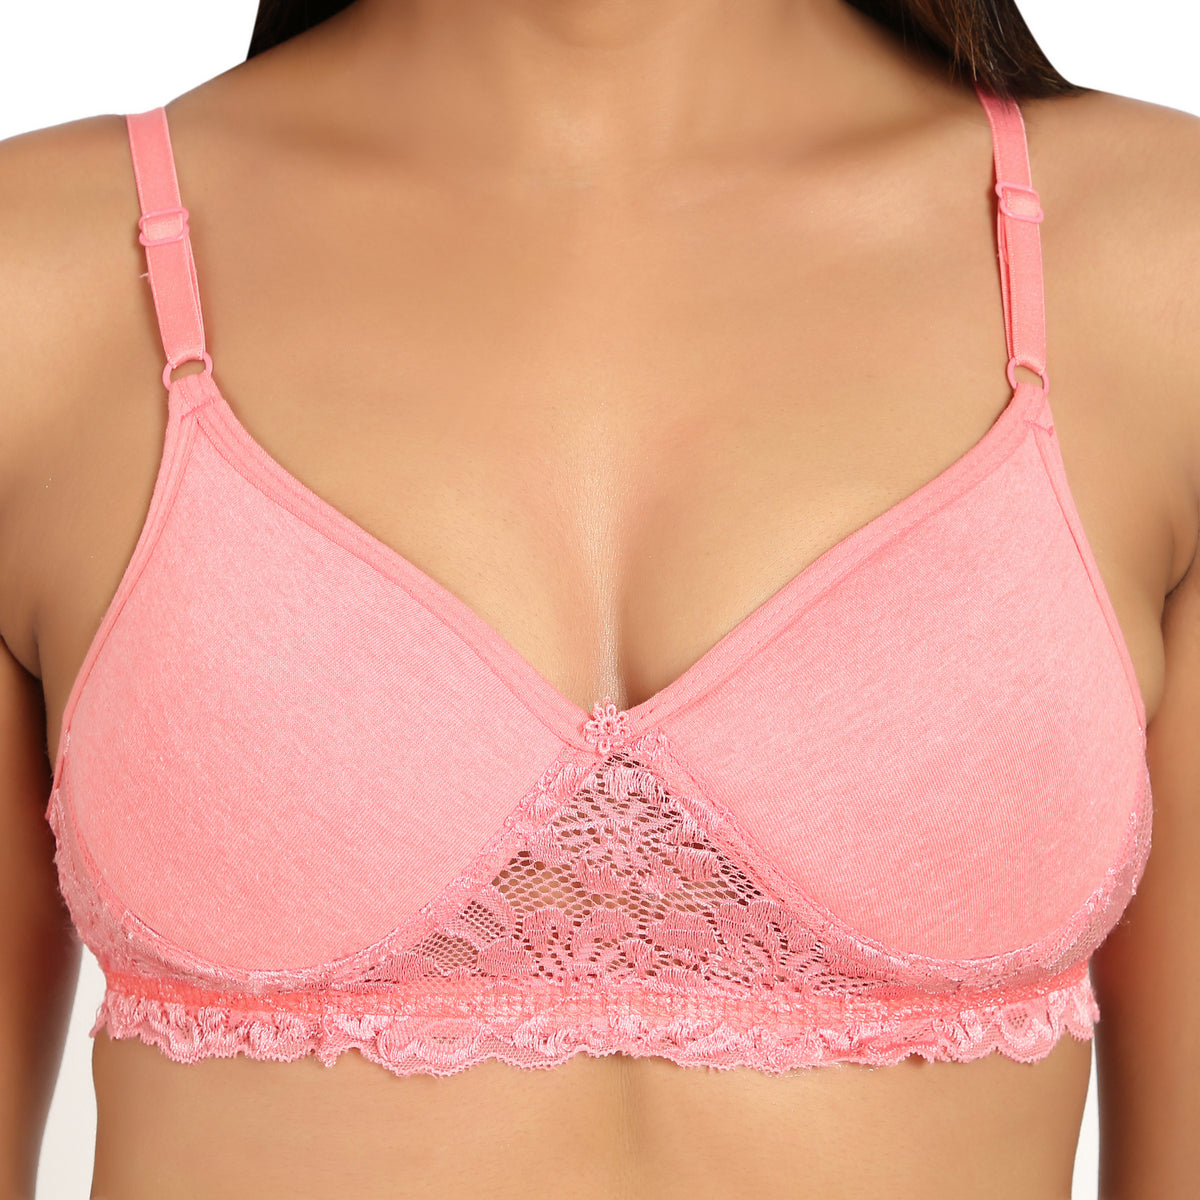 Bruchi Club Lightly Padded Non-Wired Pink T-Shirt Bra with Lace – Bruchiclub